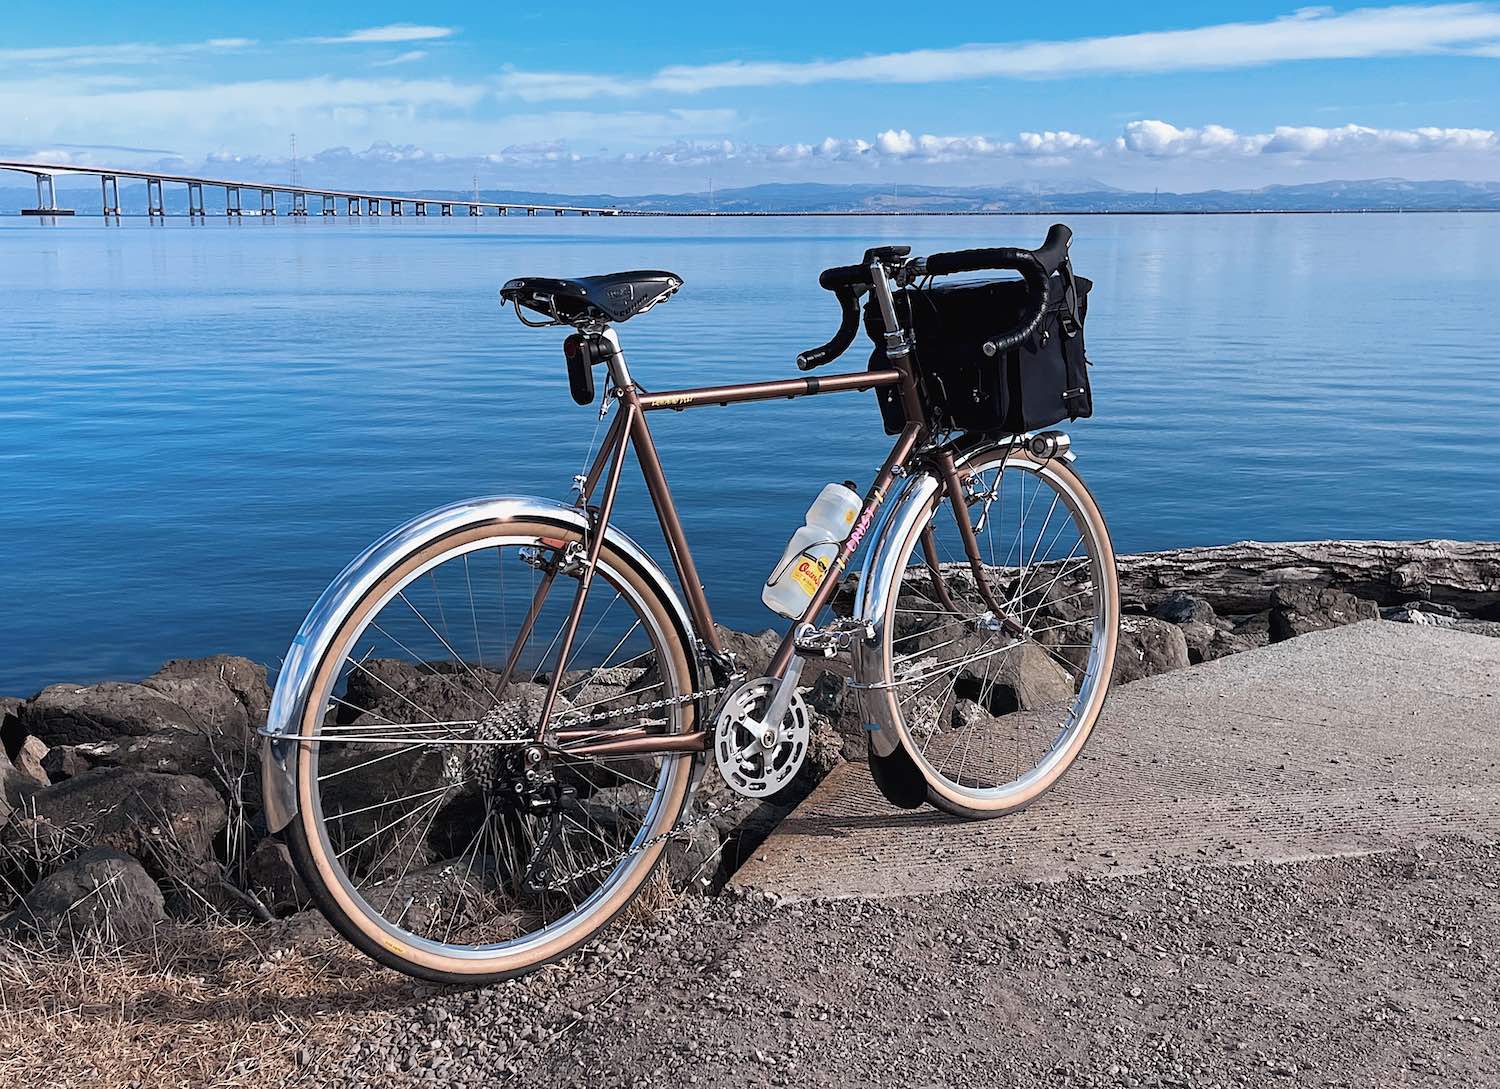 Bicycle in front of the San Mateo Bridge